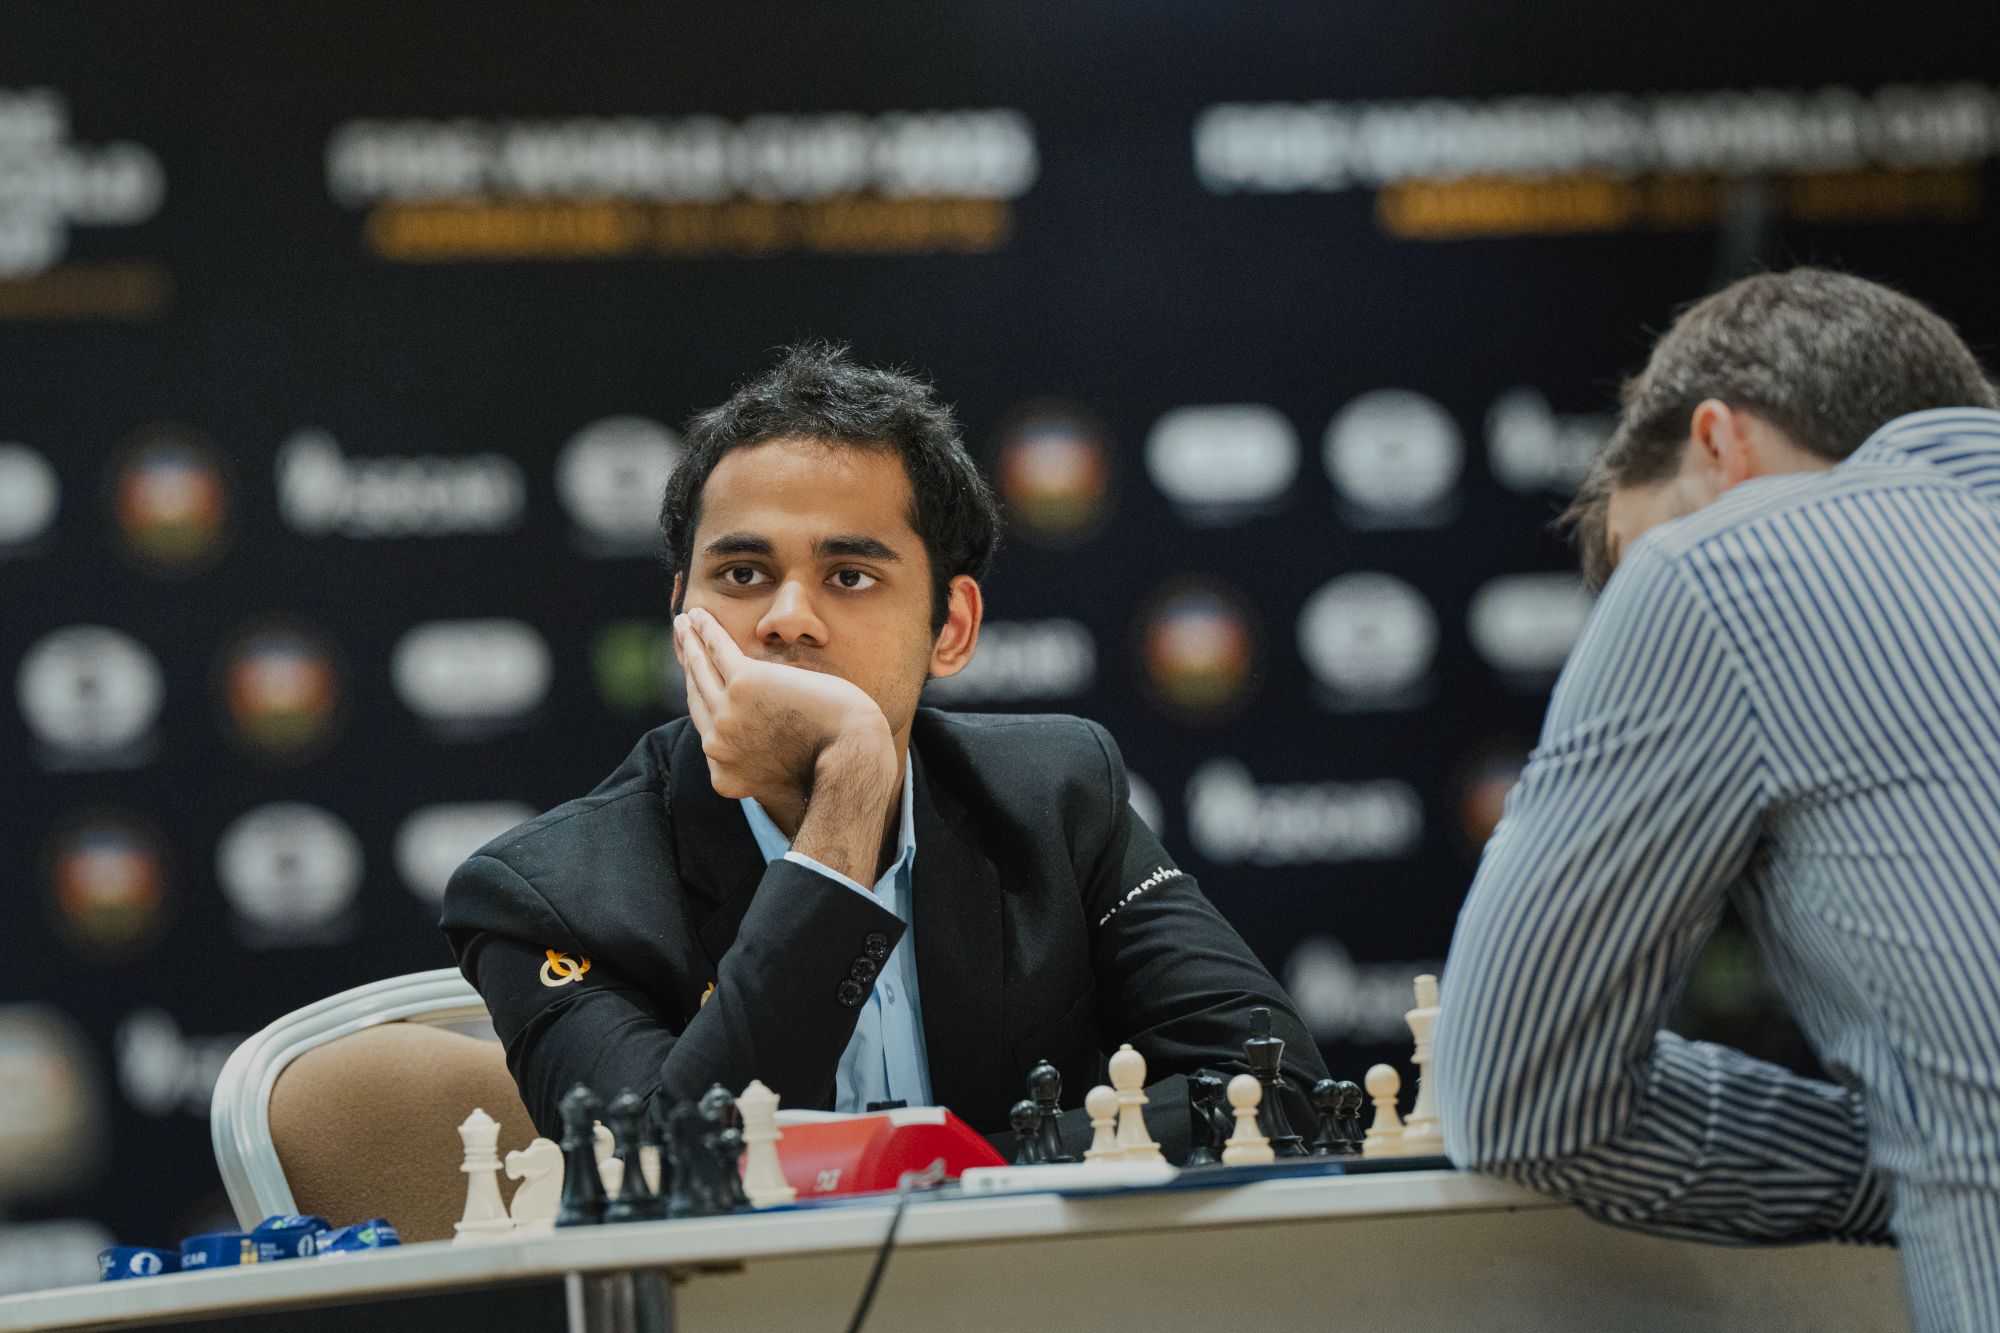 11668808 - FIDE Chess World Cup 2023Search